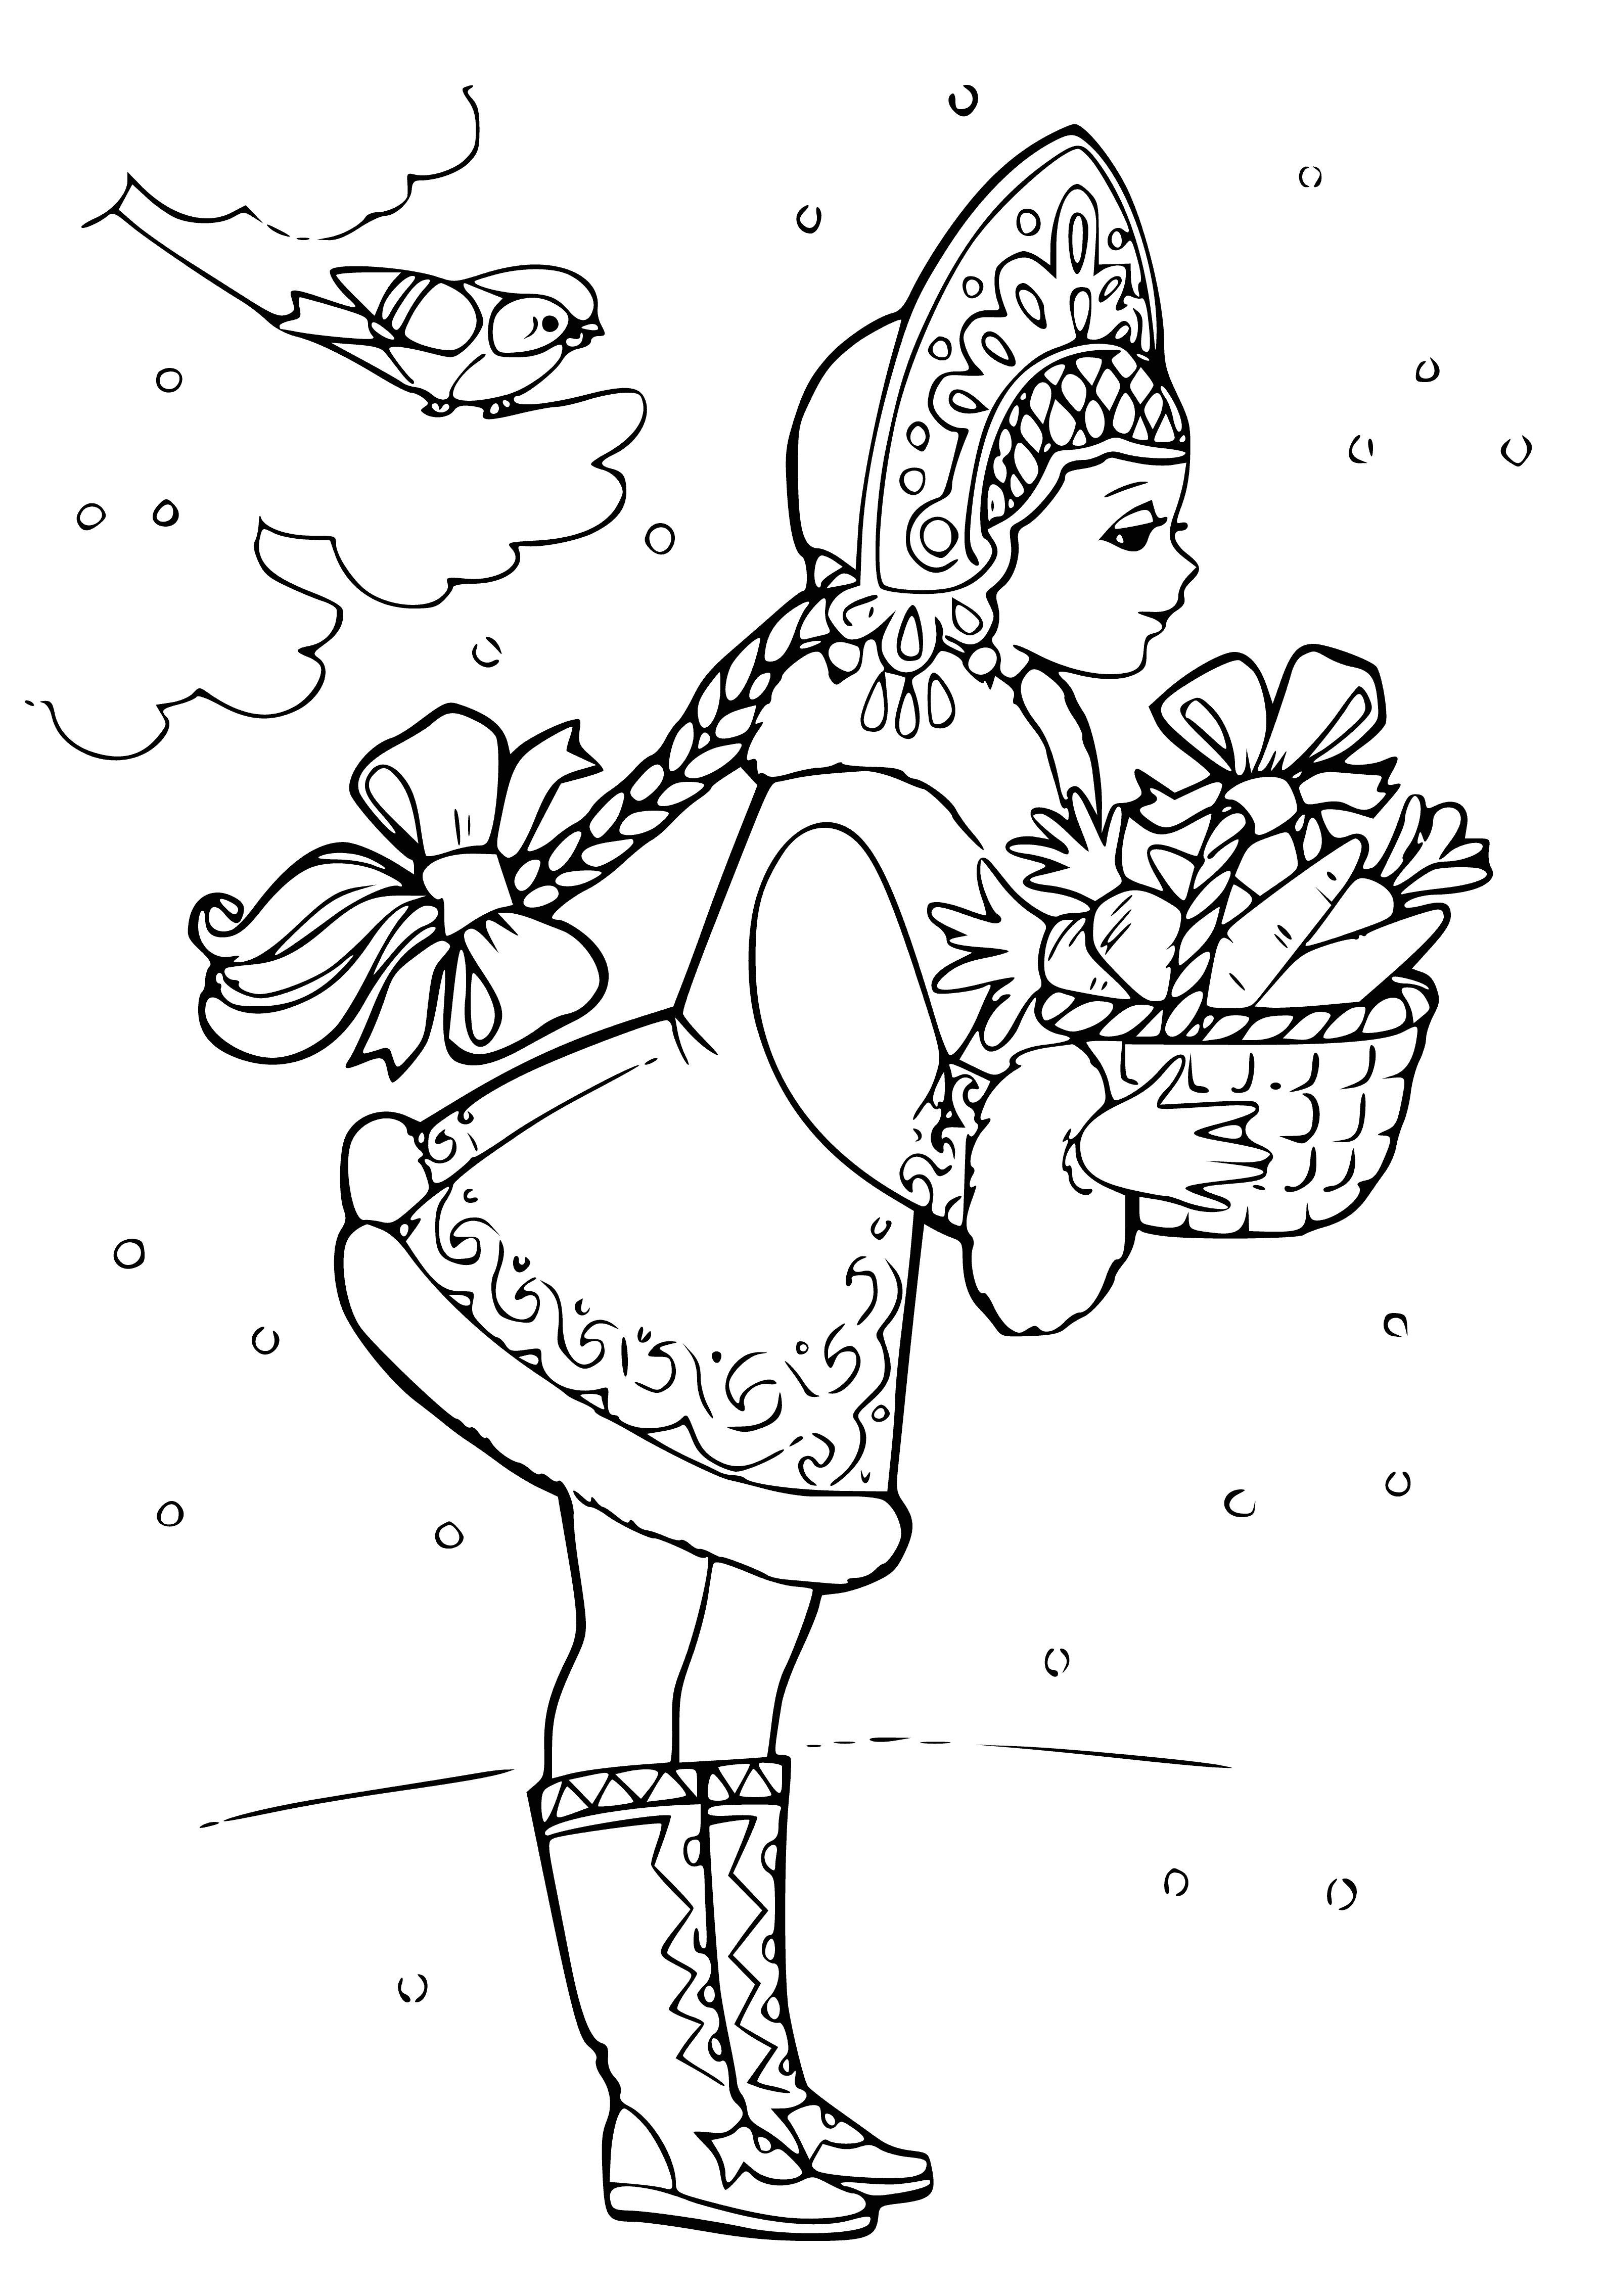 Girl stands in snow with a scarf, dress & basket.  #wintervibes